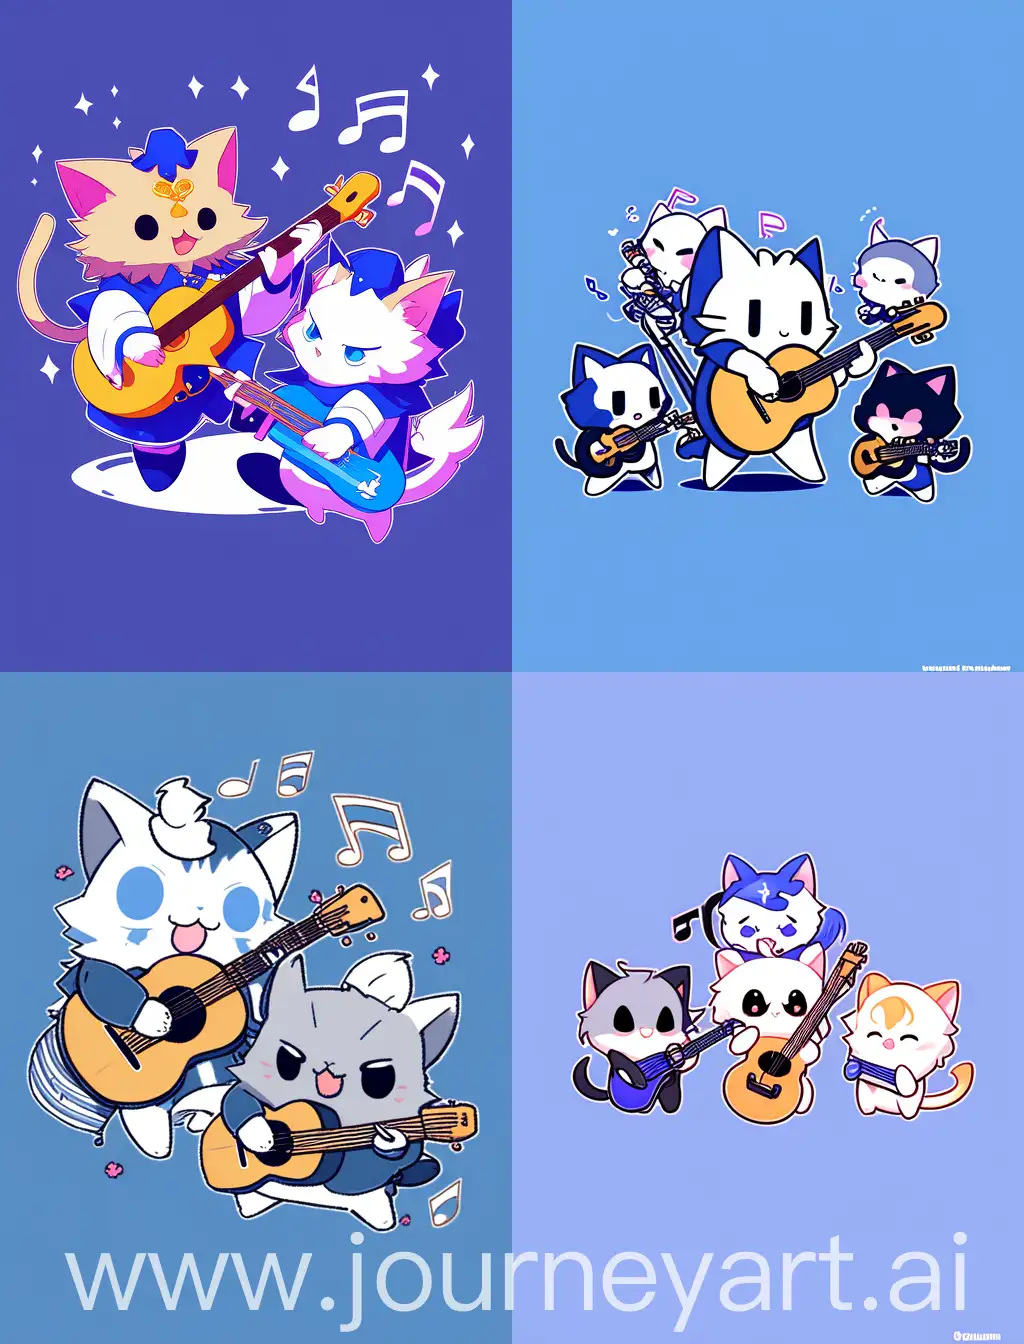 Chibi-Cats-Playing-Guitar-Adorable-Feline-Musicians-on-Vibrant-Blue-Background